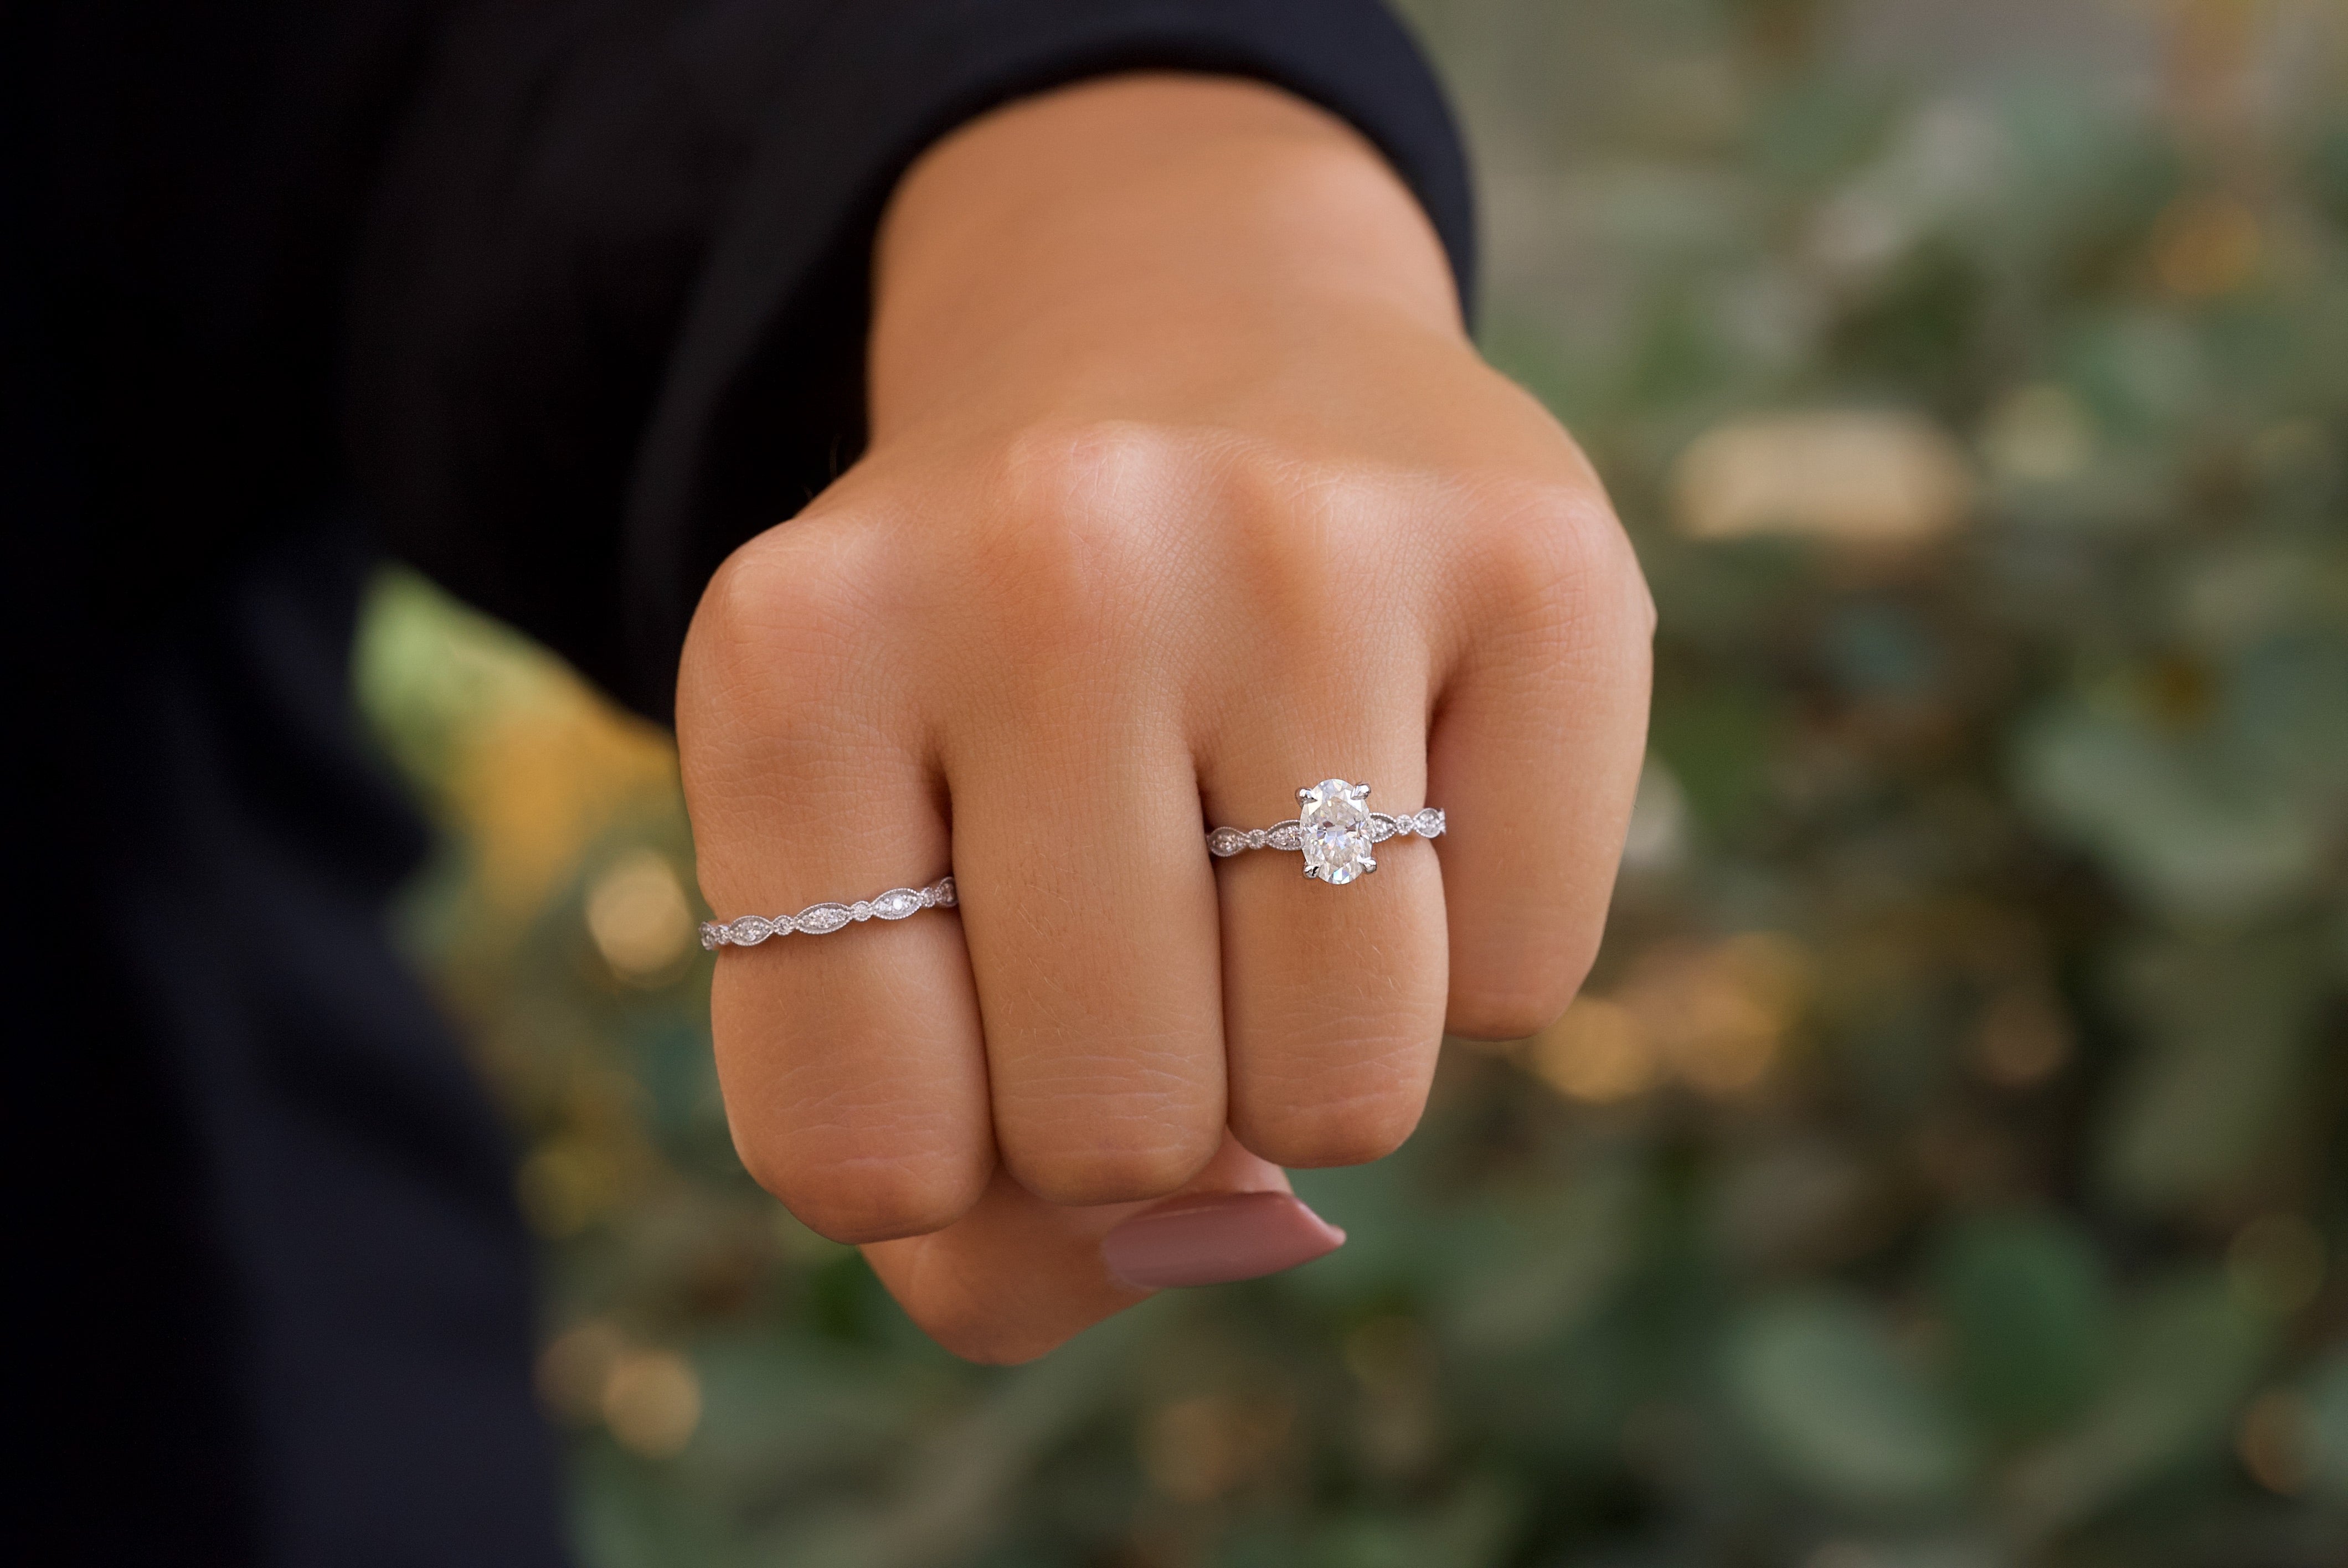 Retro Style Engagement Rings: How to Get the Look